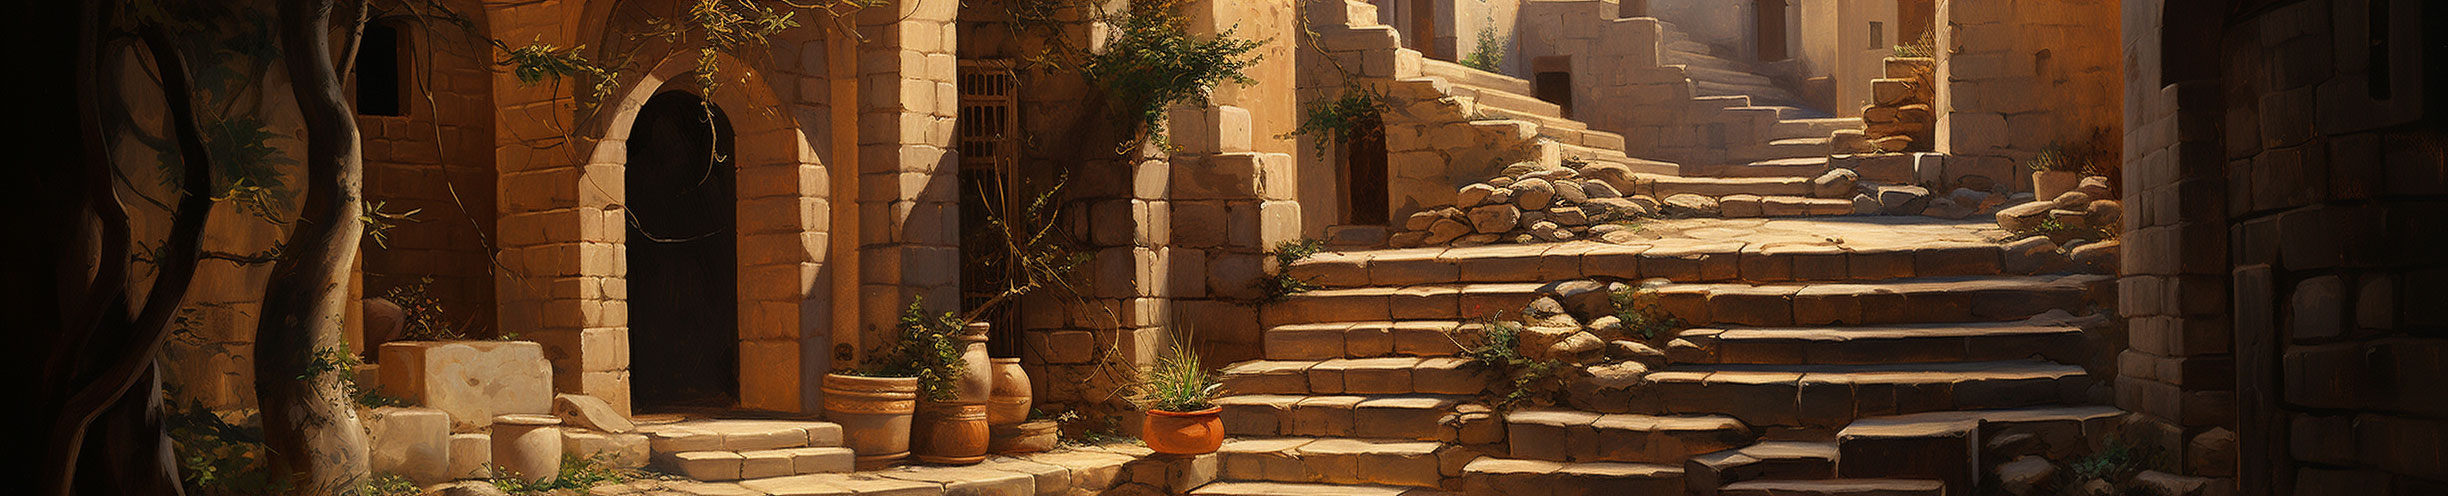 tychodreq_a_finely_detailed_oil_painting_of_a_stone_stairs_lead_afb309cb-899e-4bb1-95ea-9e47238e9460.jpg